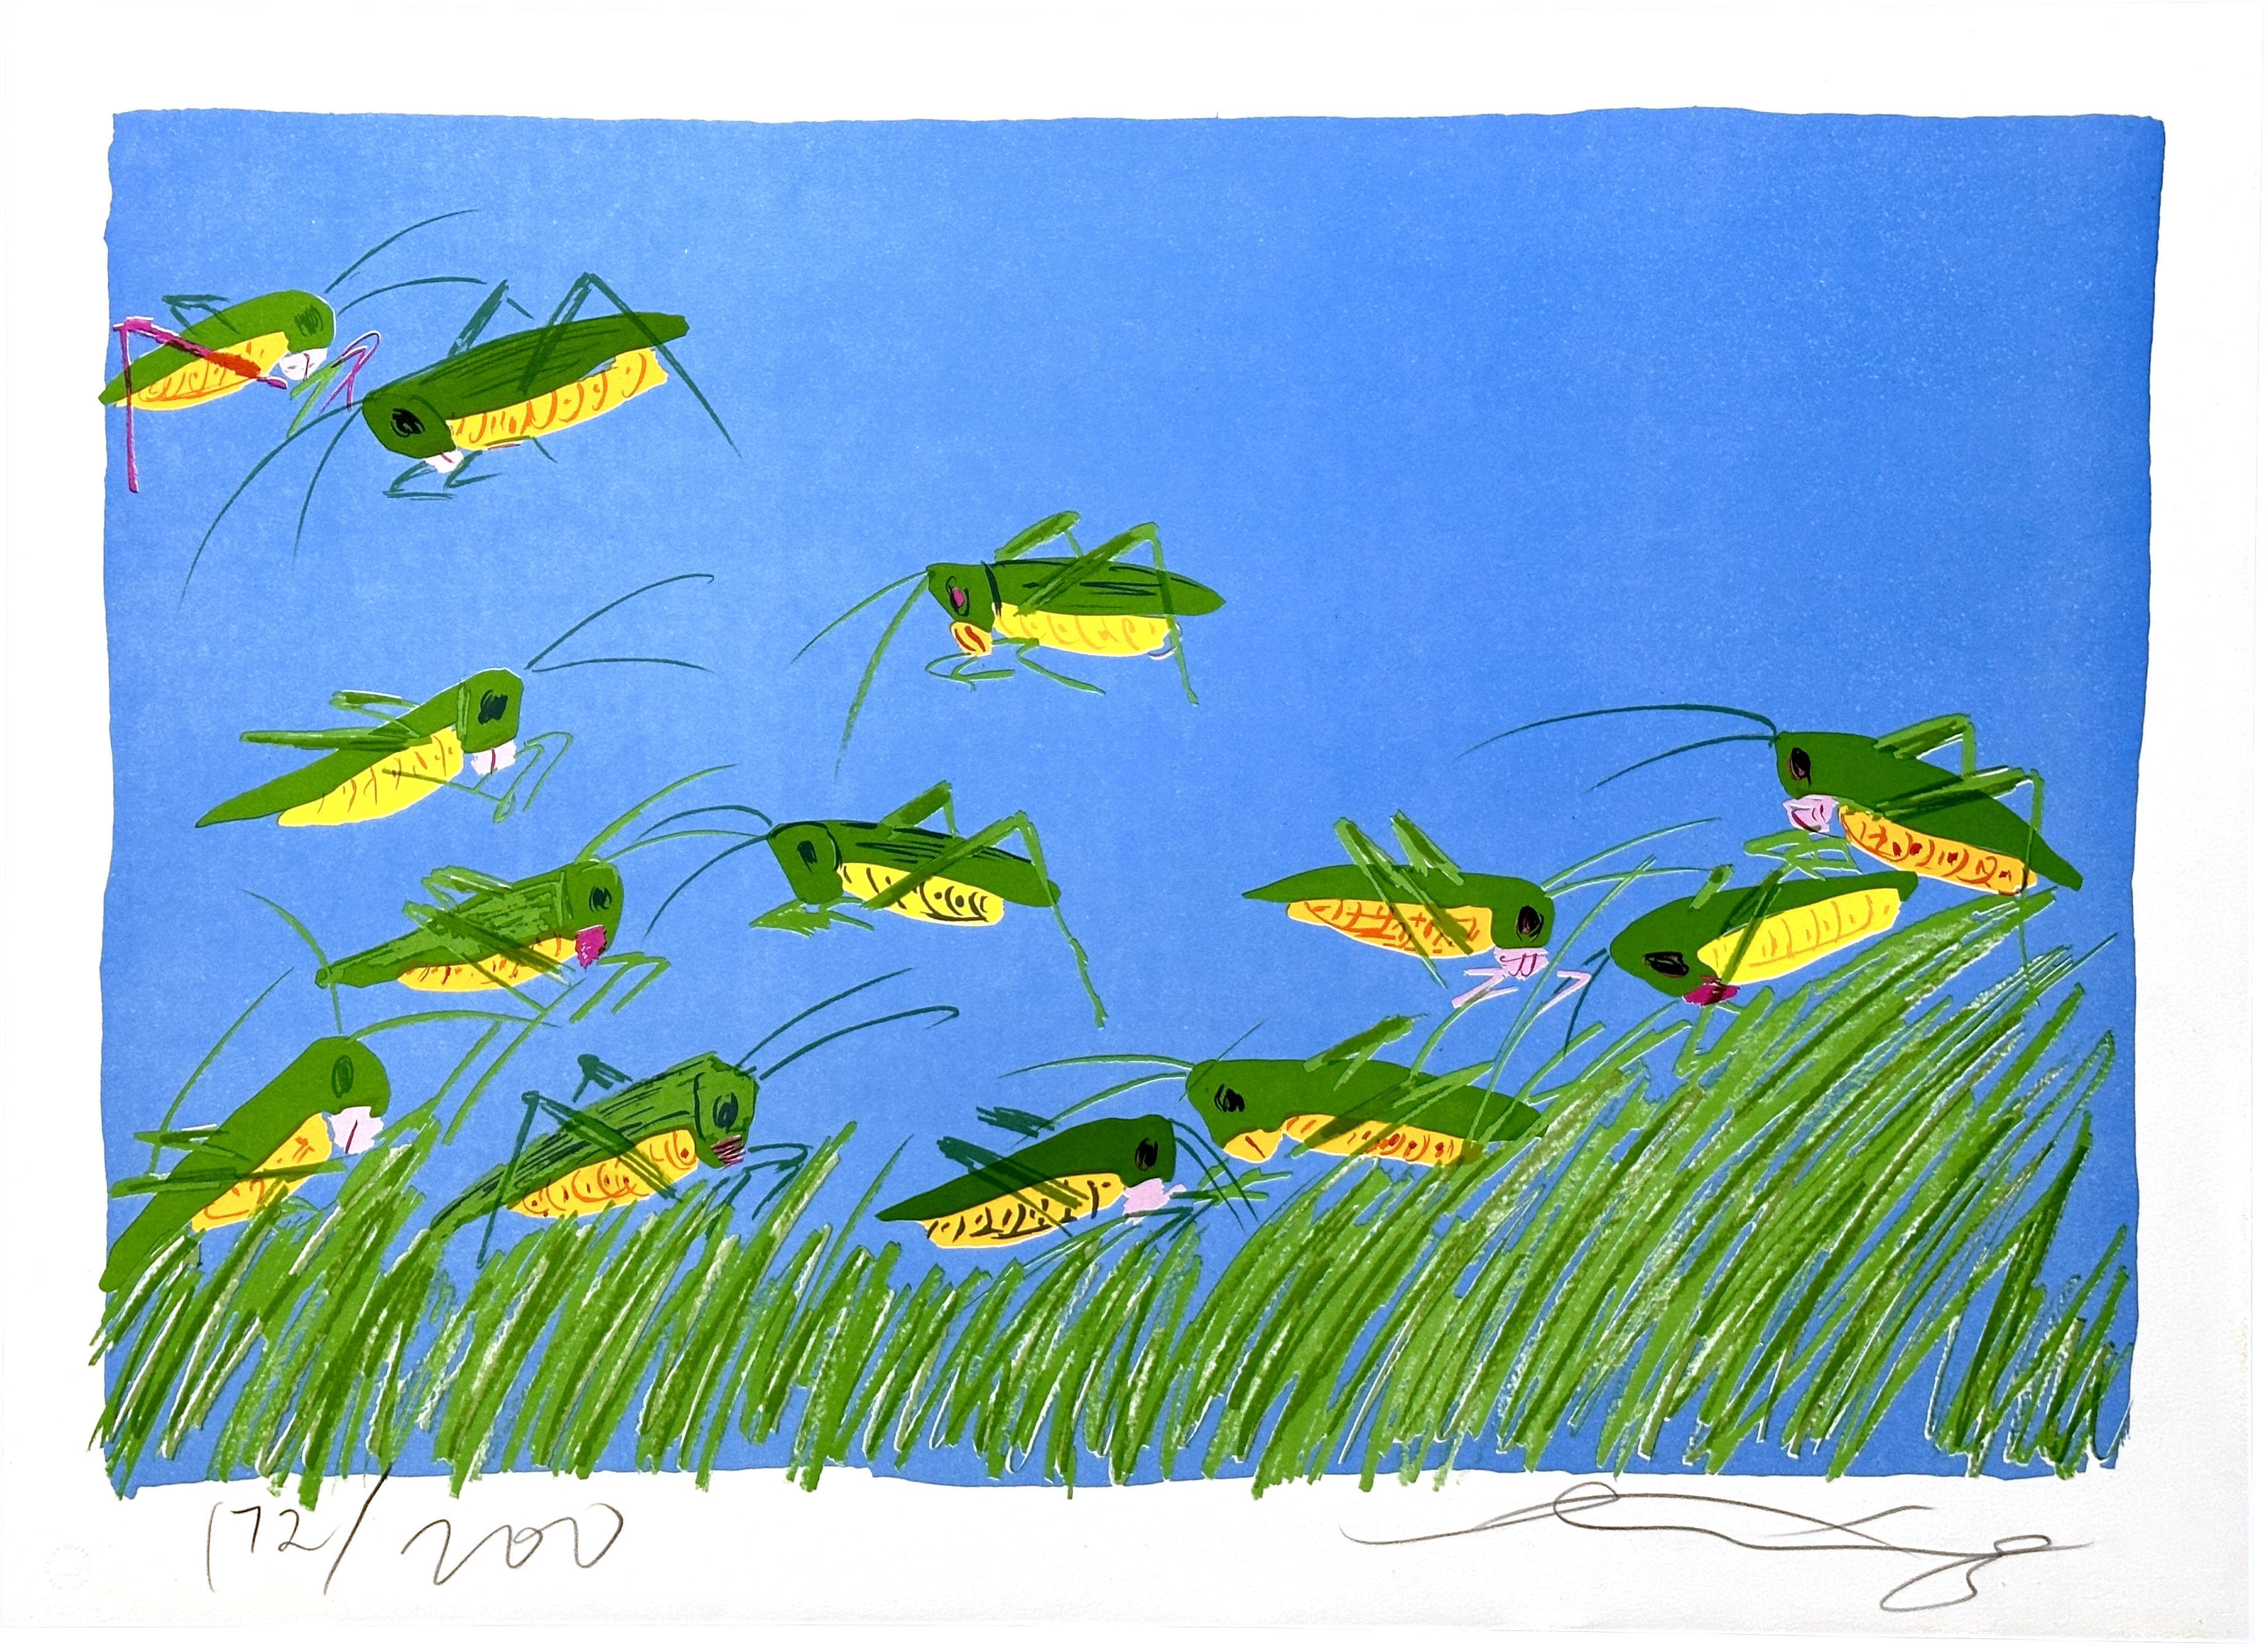 Walasse Ting Animal Print - Grasshoppers 1981 Lithograph on Arches Archival Paper